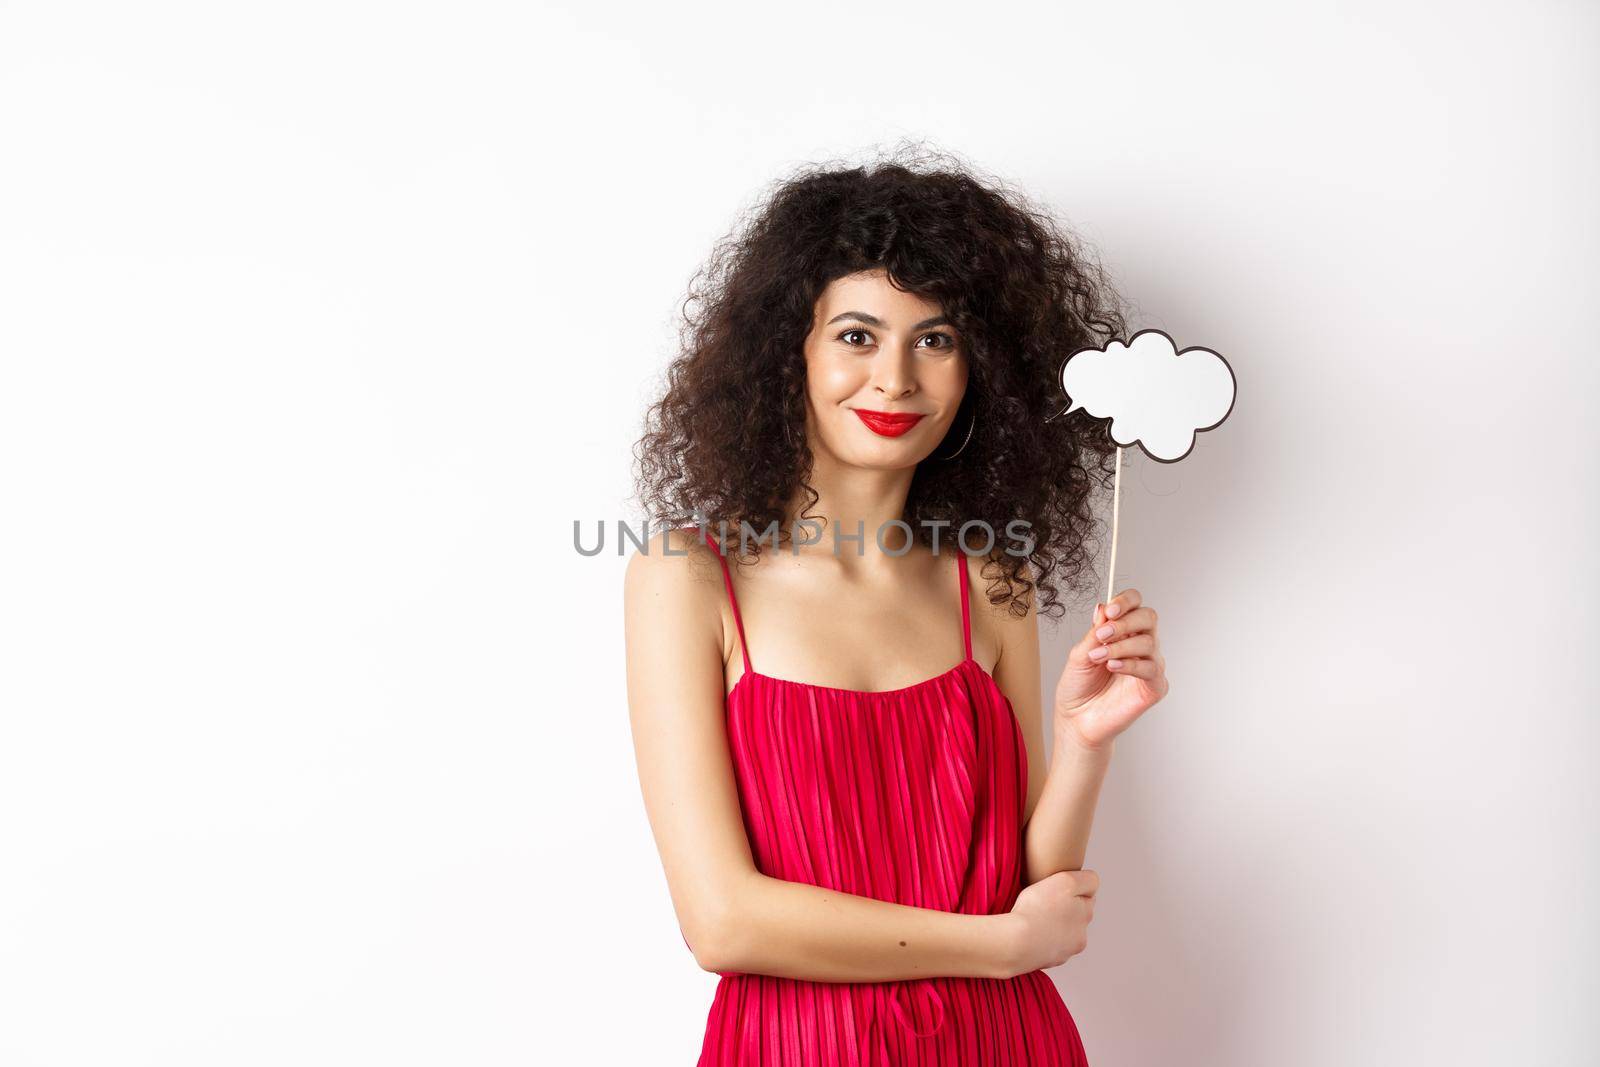 Elegant woman with curly hair, wearing red evening dress, holding cloud and smiling, standing on white background.